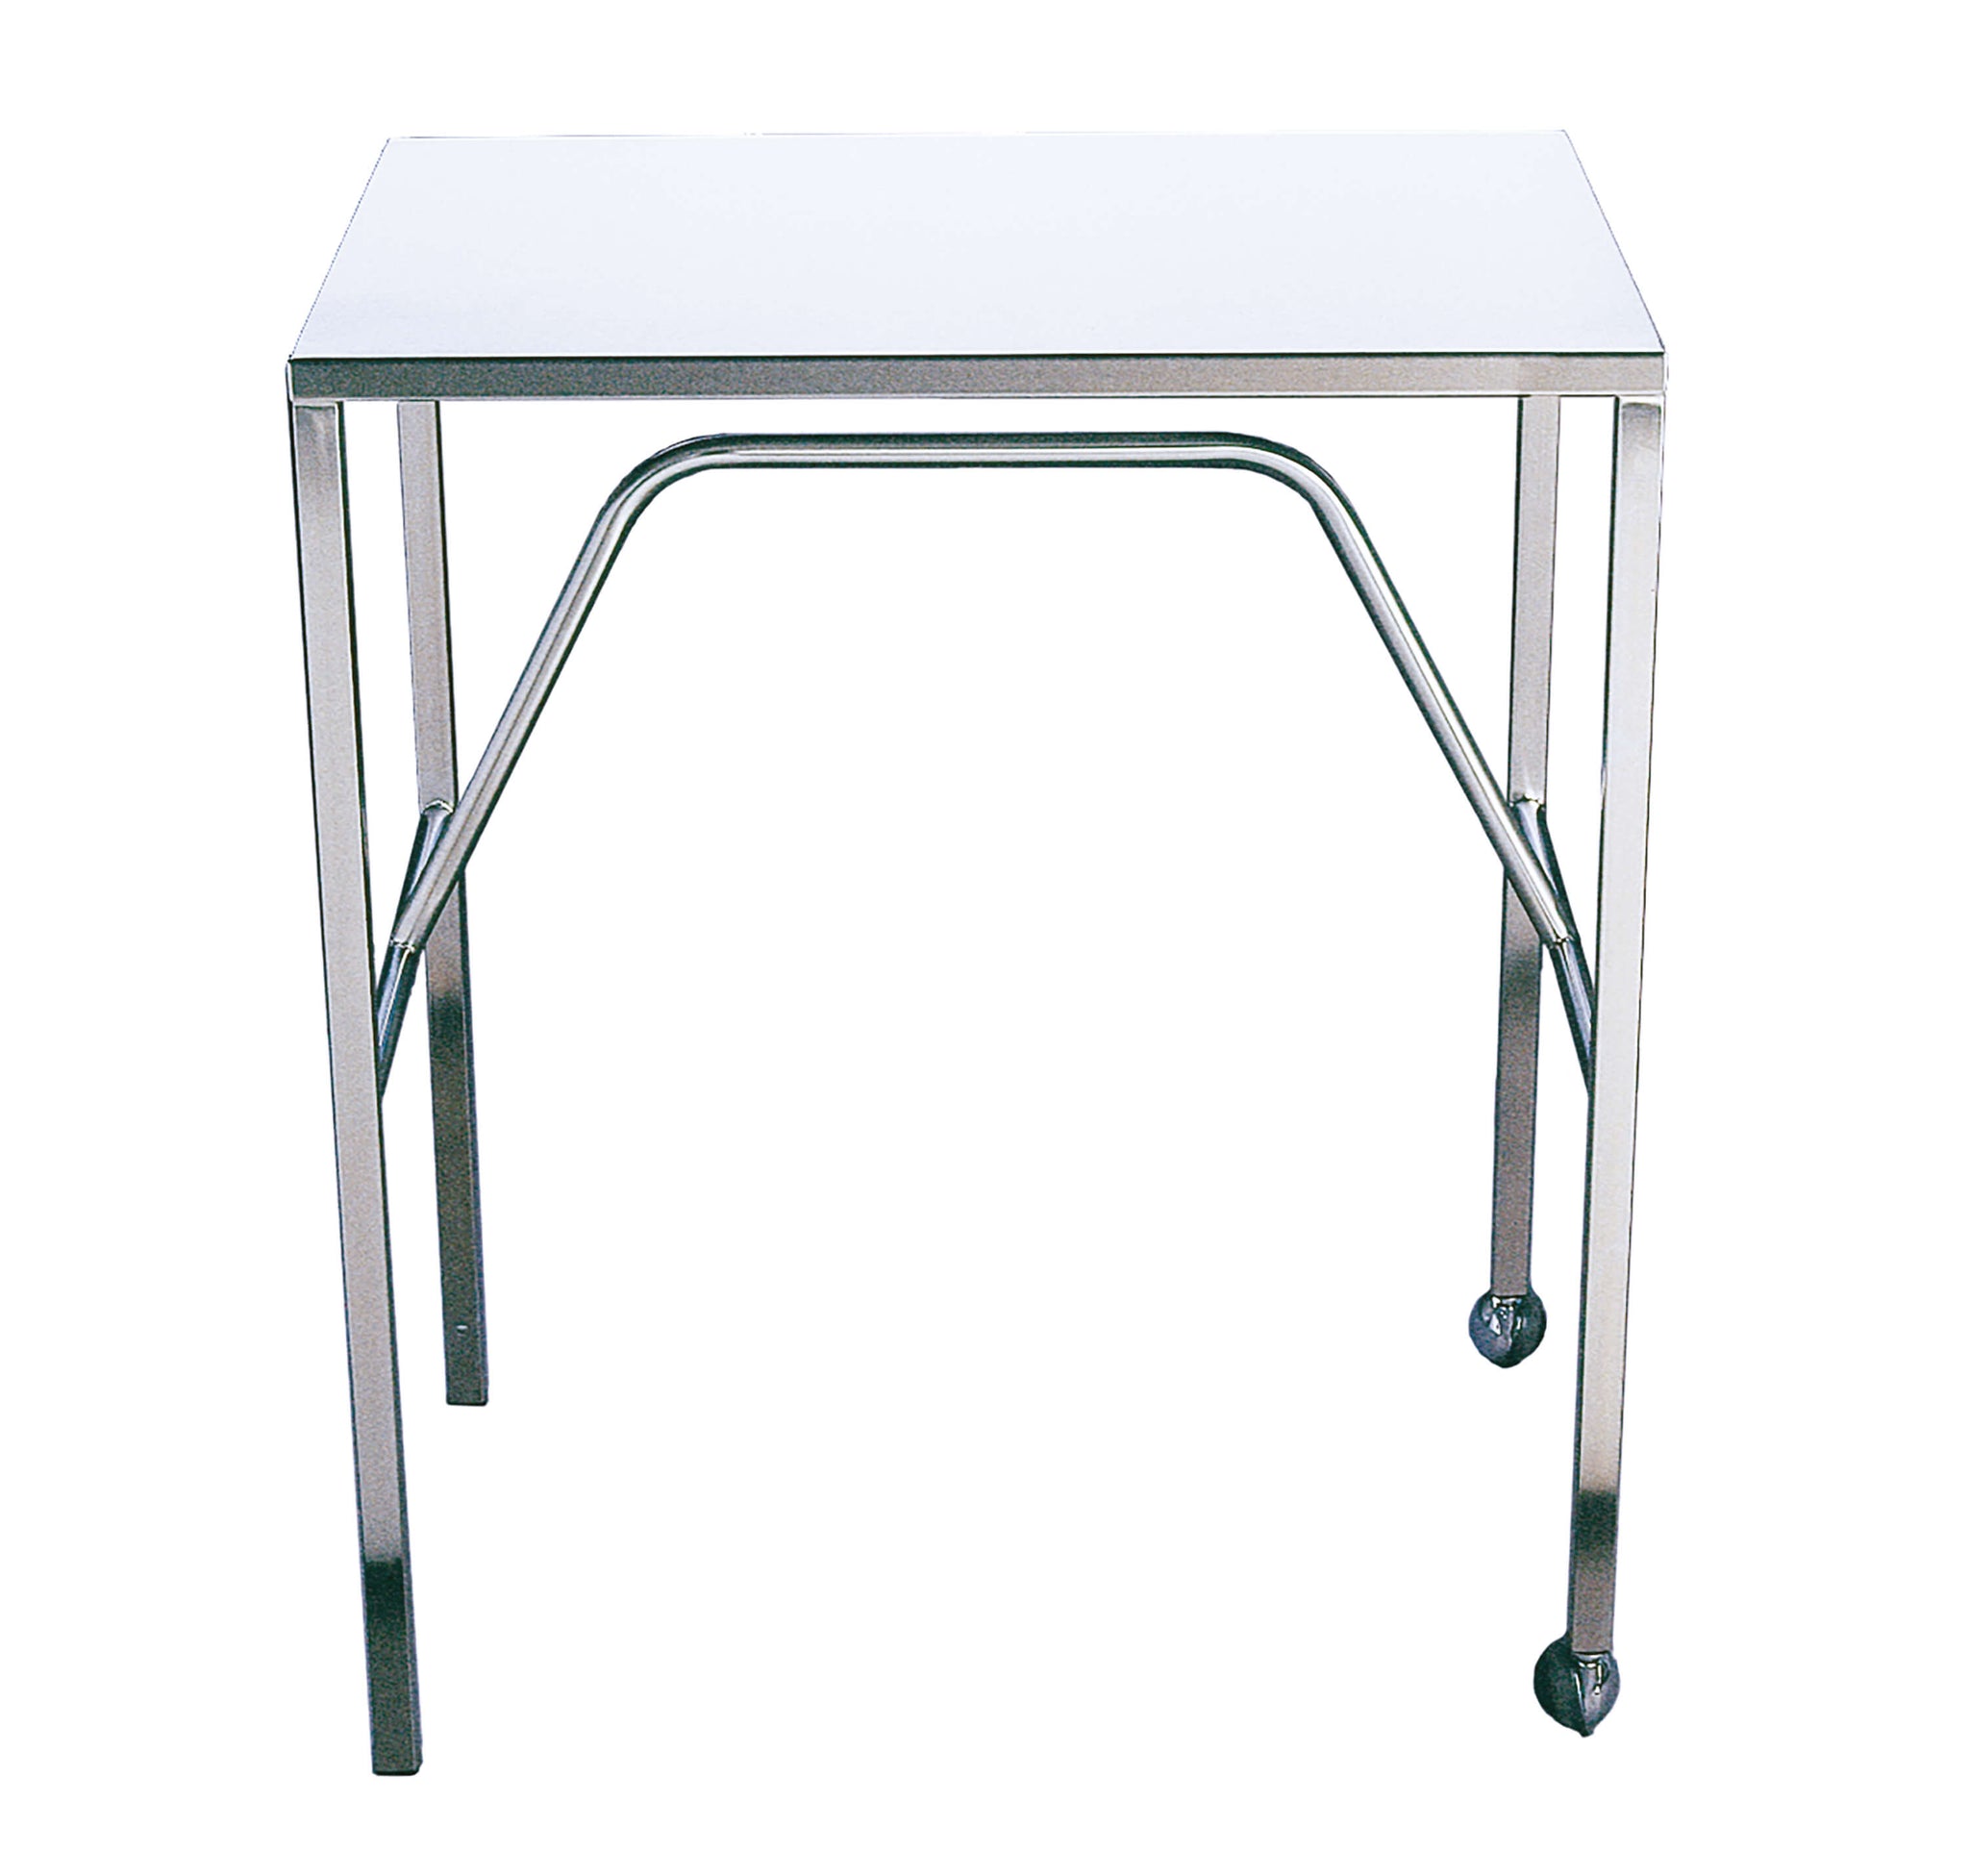 Arm Table - Fixed Height, 750 X 490 X 900 mm